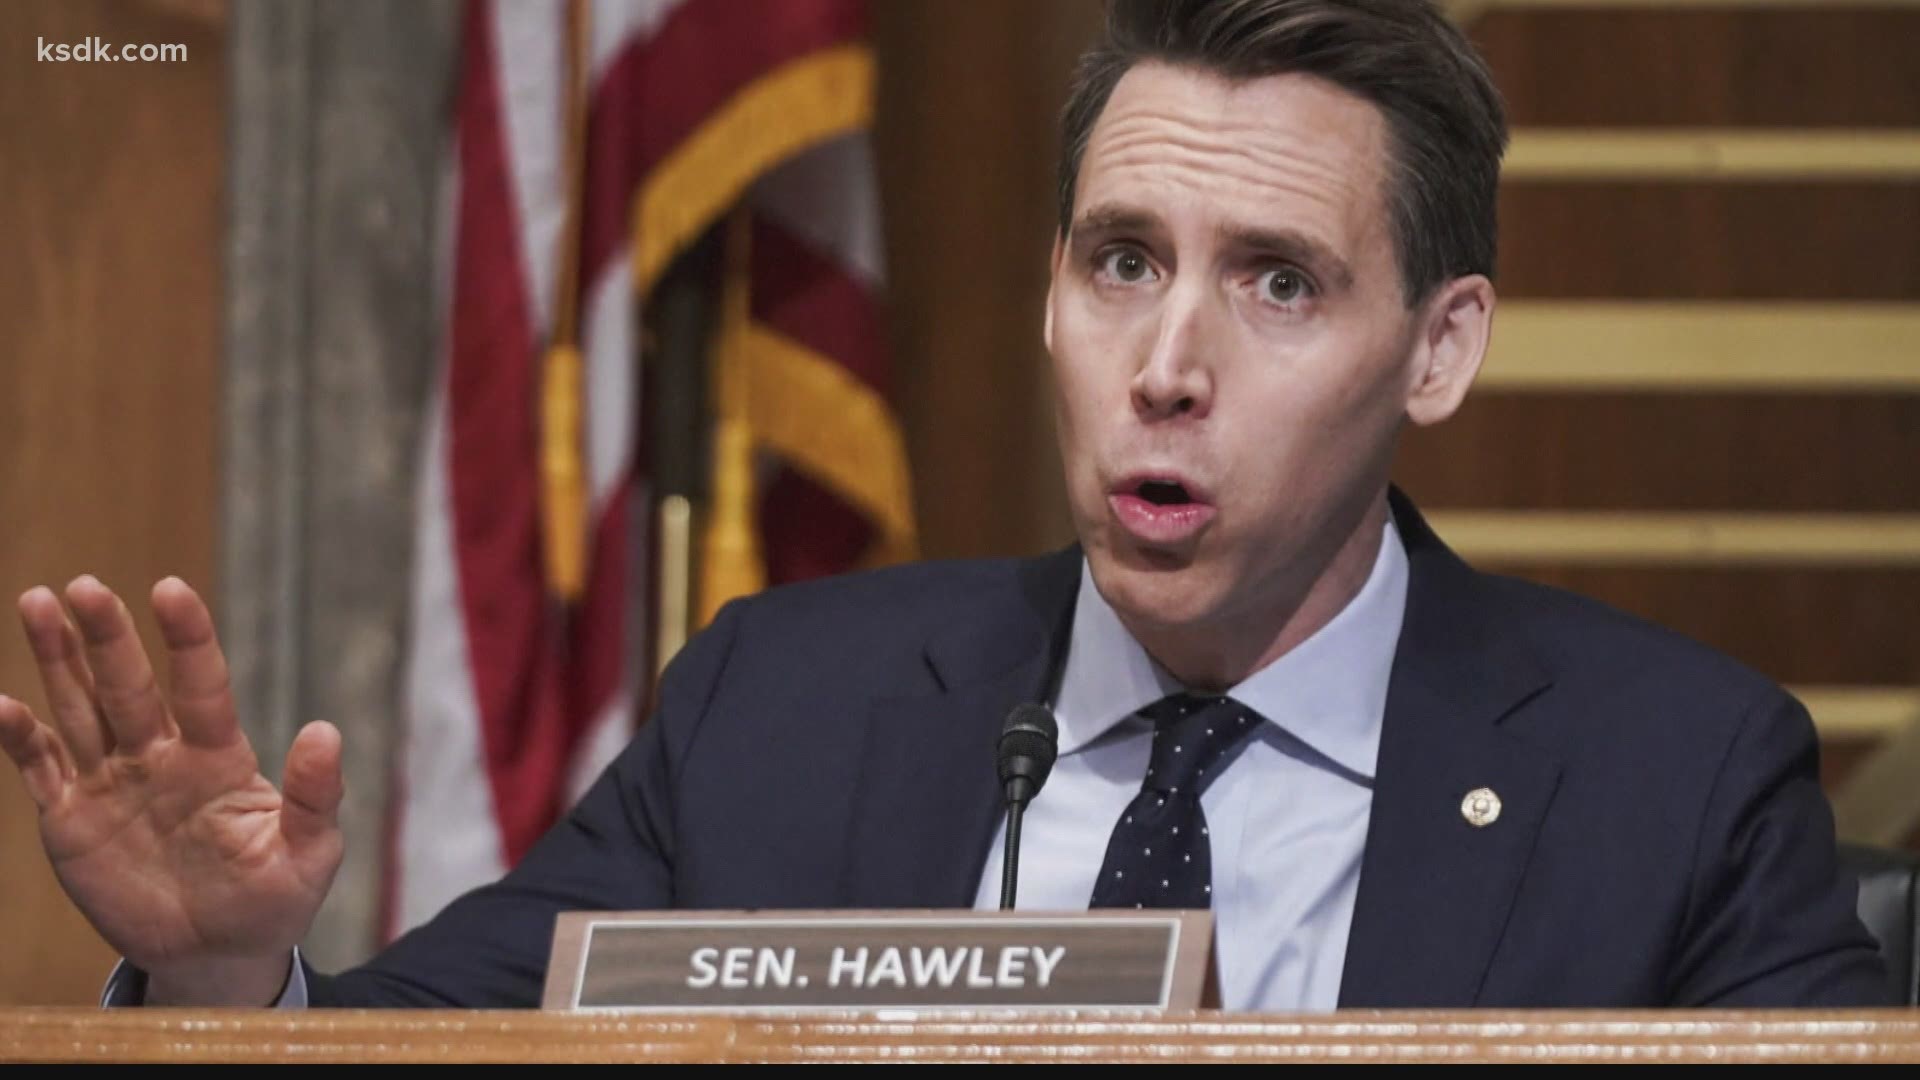 Rep. Cori Bush (D-MO 01) will introduce a measure Monday to punish congressmembers — like Hawley — who she believes fueled the Capitol coup attempt